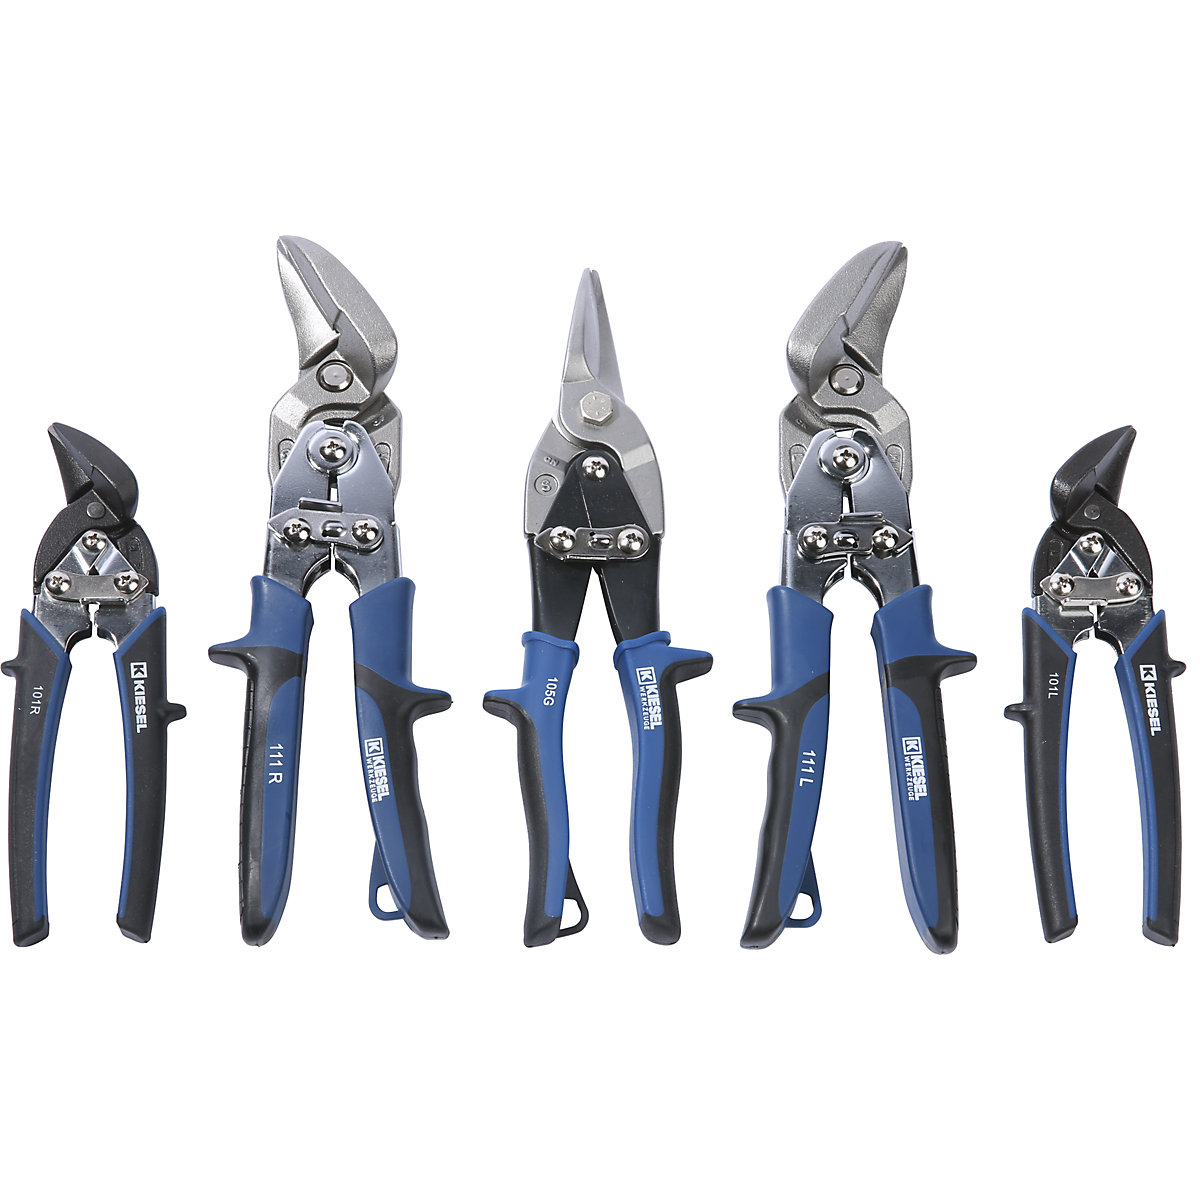 MAXI set of figure and straight cutting snips